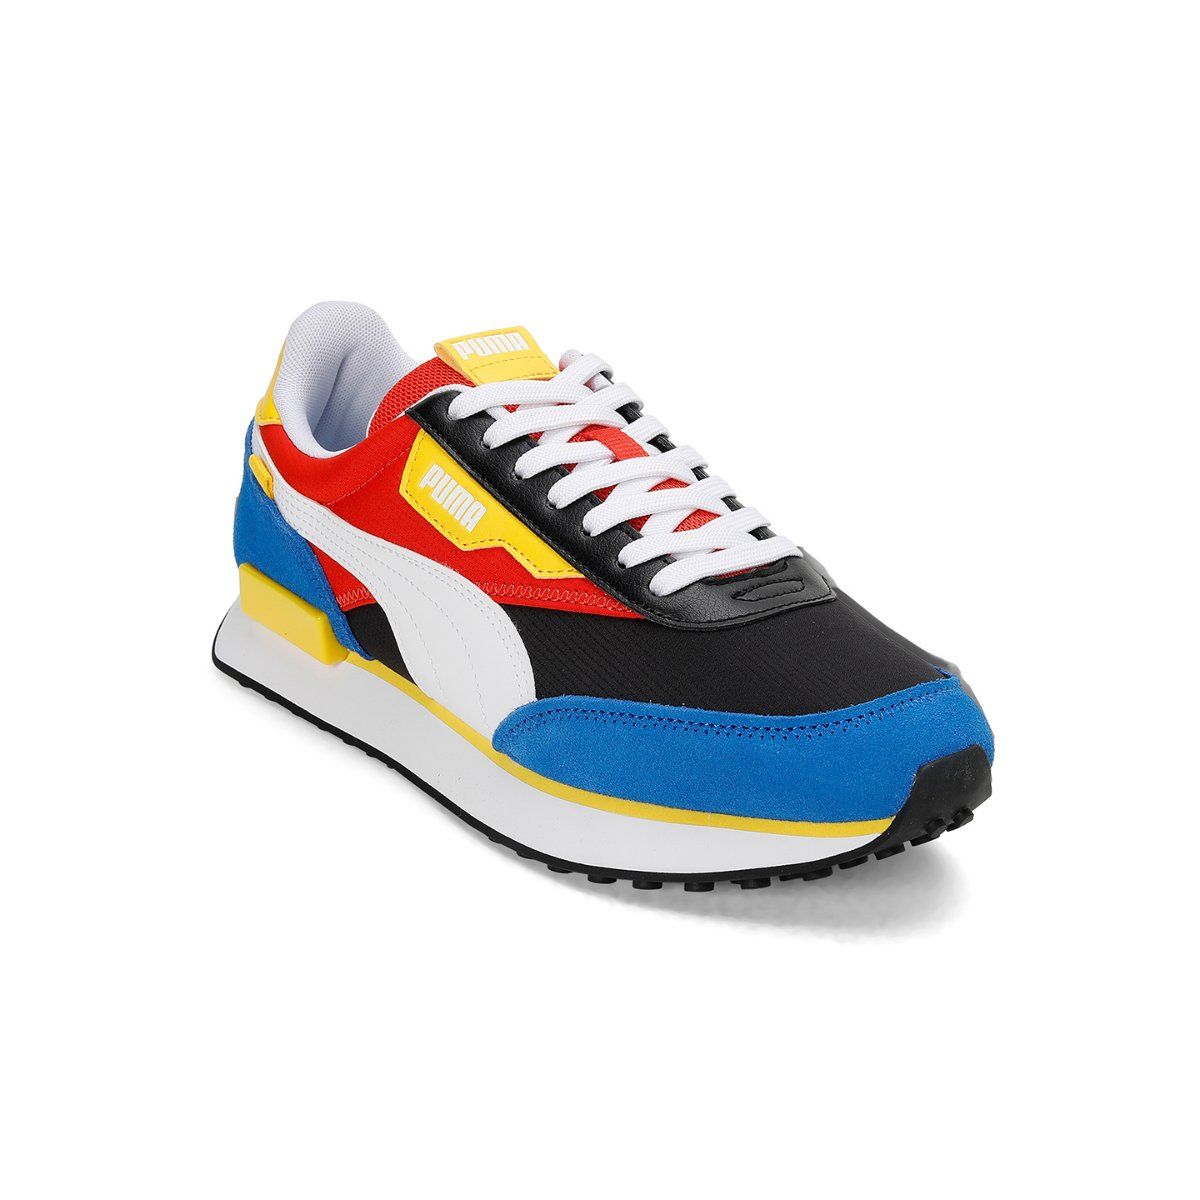 PUMA RS-X WH Sneakers For Women - Buy PUMA RS-X WH Sneakers For Women  Online at Best Price - Shop Online for Footwears in India | Flipkart.com